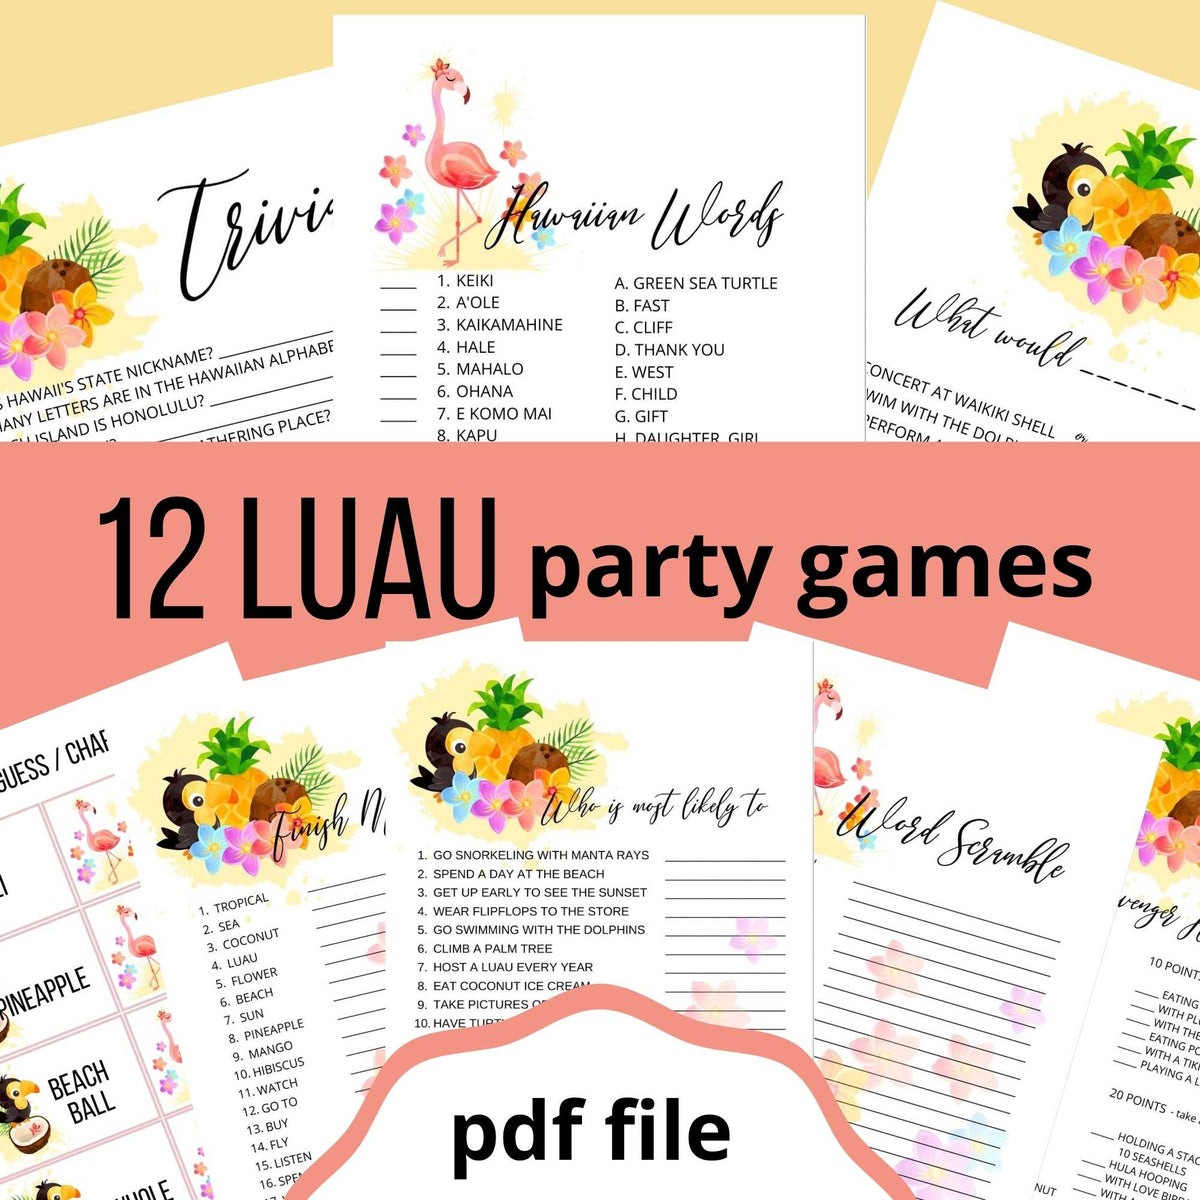 Luau Games - Tropical (printable games for luau party) – Relaxed Hostess